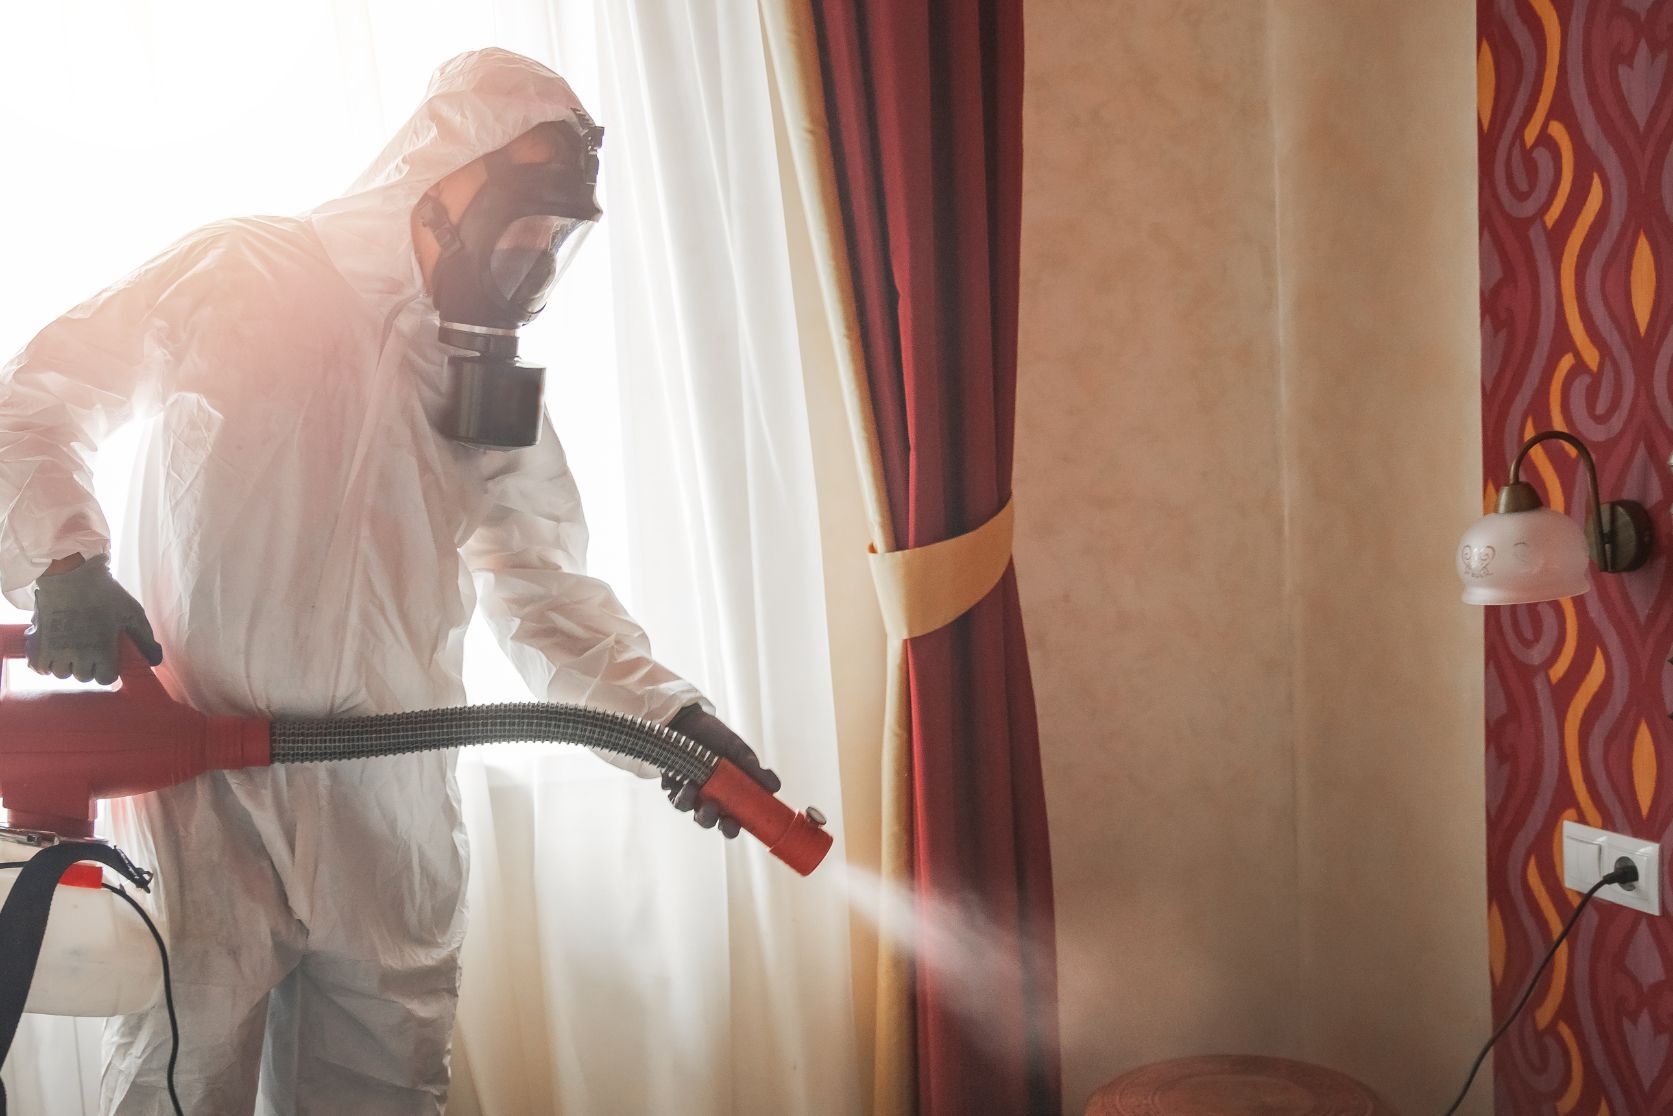 Pest Control Specialist Spraying Pesticide — Pest Control & Carpet Cleaning Services in Maryborough, QLD